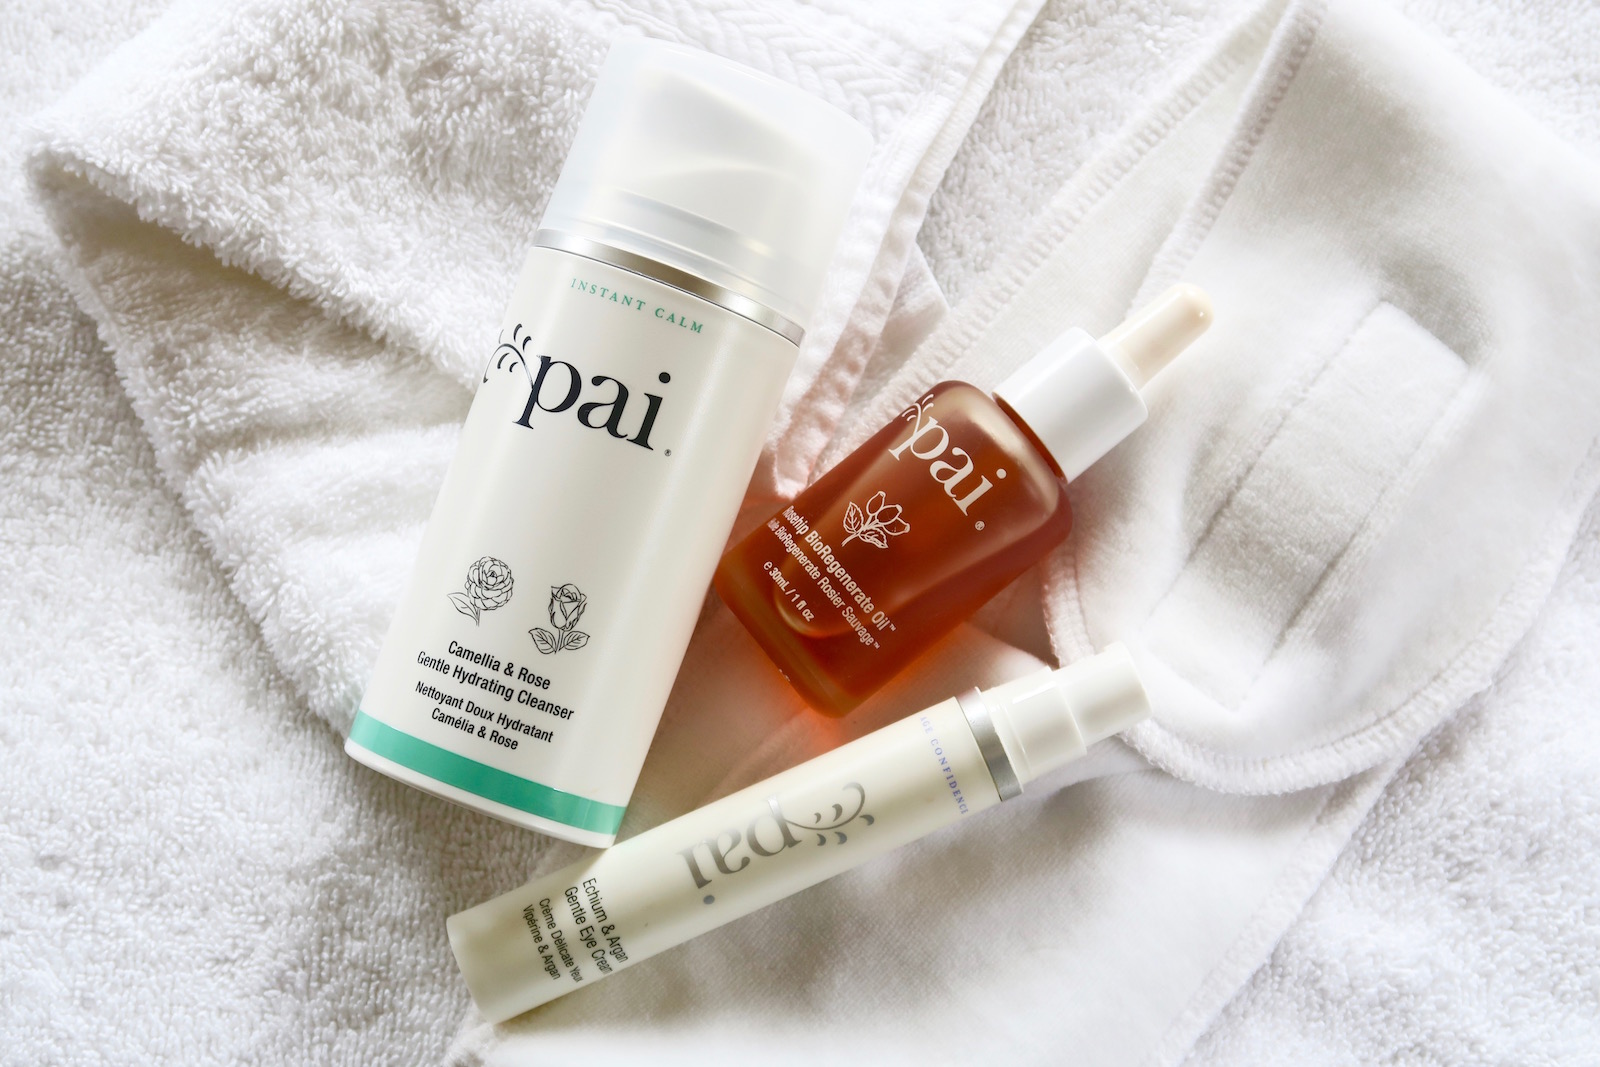 The Pai Skincare Facial: Cold Stones and Capable Hands